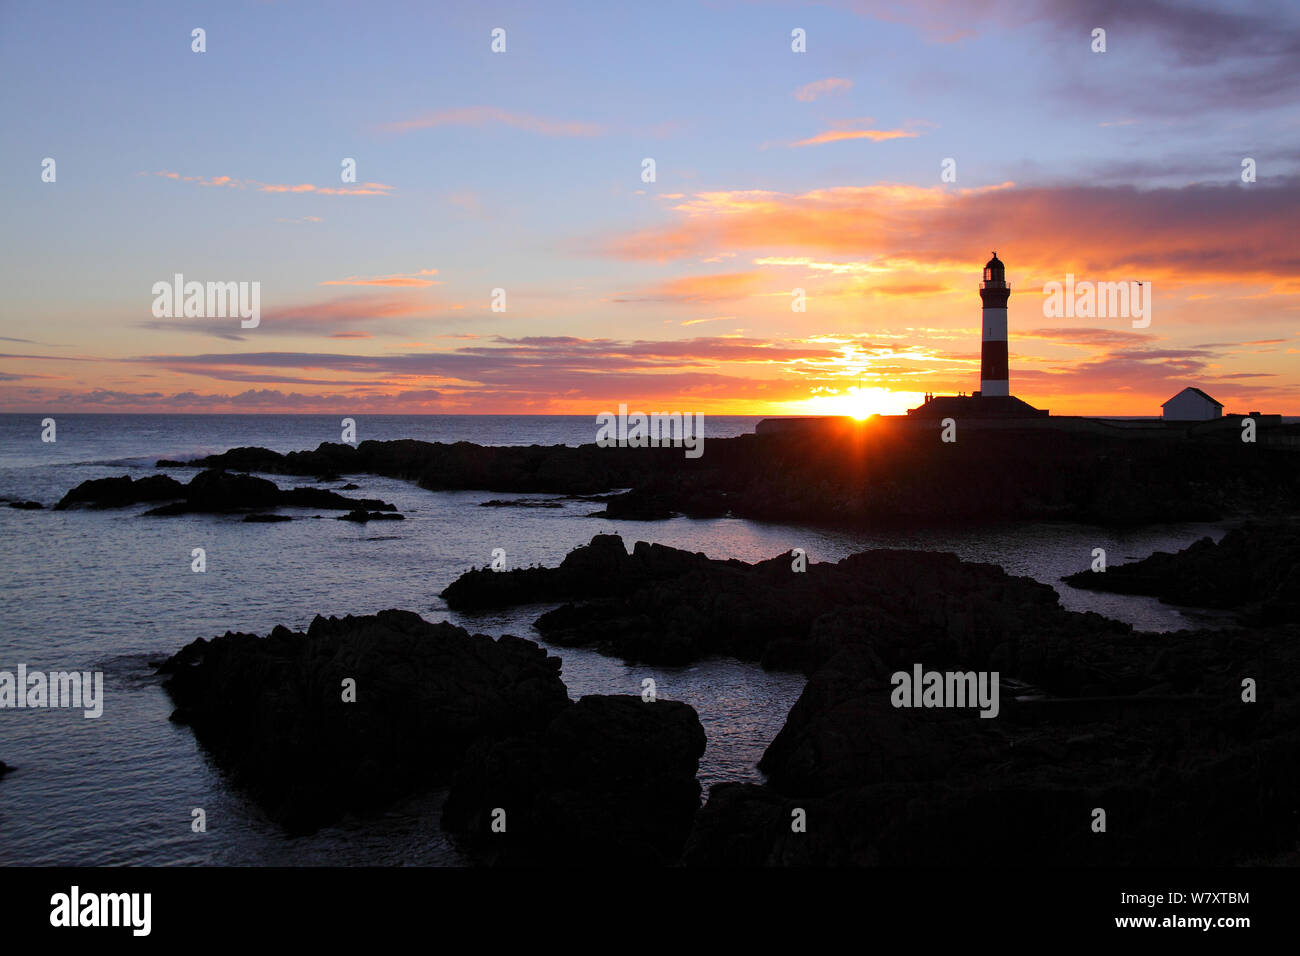 Buchan Ness Lighthouse at sunrise, Scotland, January 2014. All non-editorial uses must be cleared individually. Stock Photo